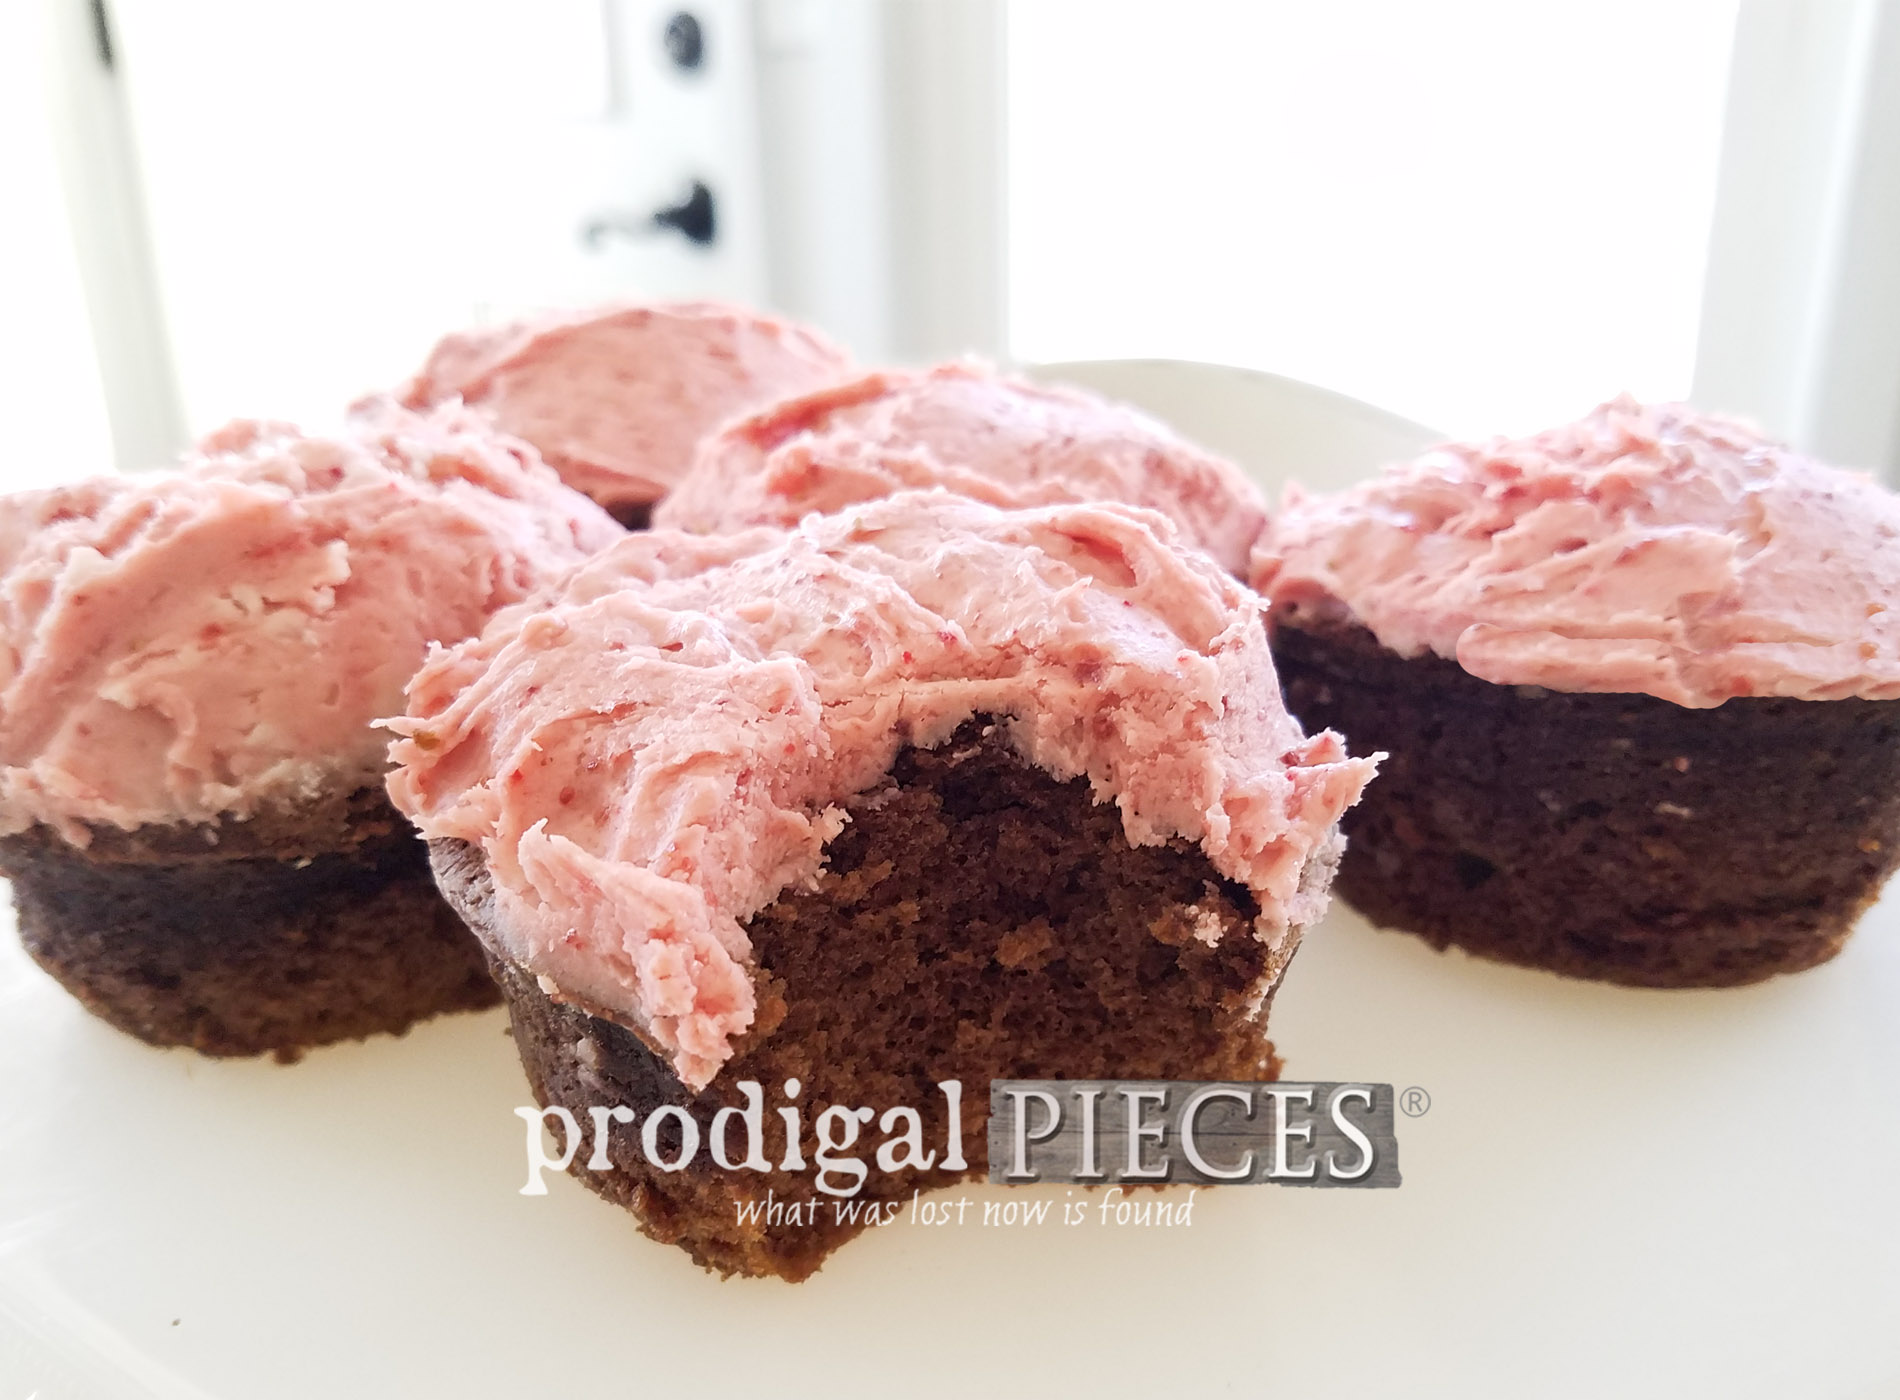 Featured Grain-Free Chocolate Cupcakes with Strawberry Frosting by Larissa of Prodigal Pieces | prodigalpieces.com